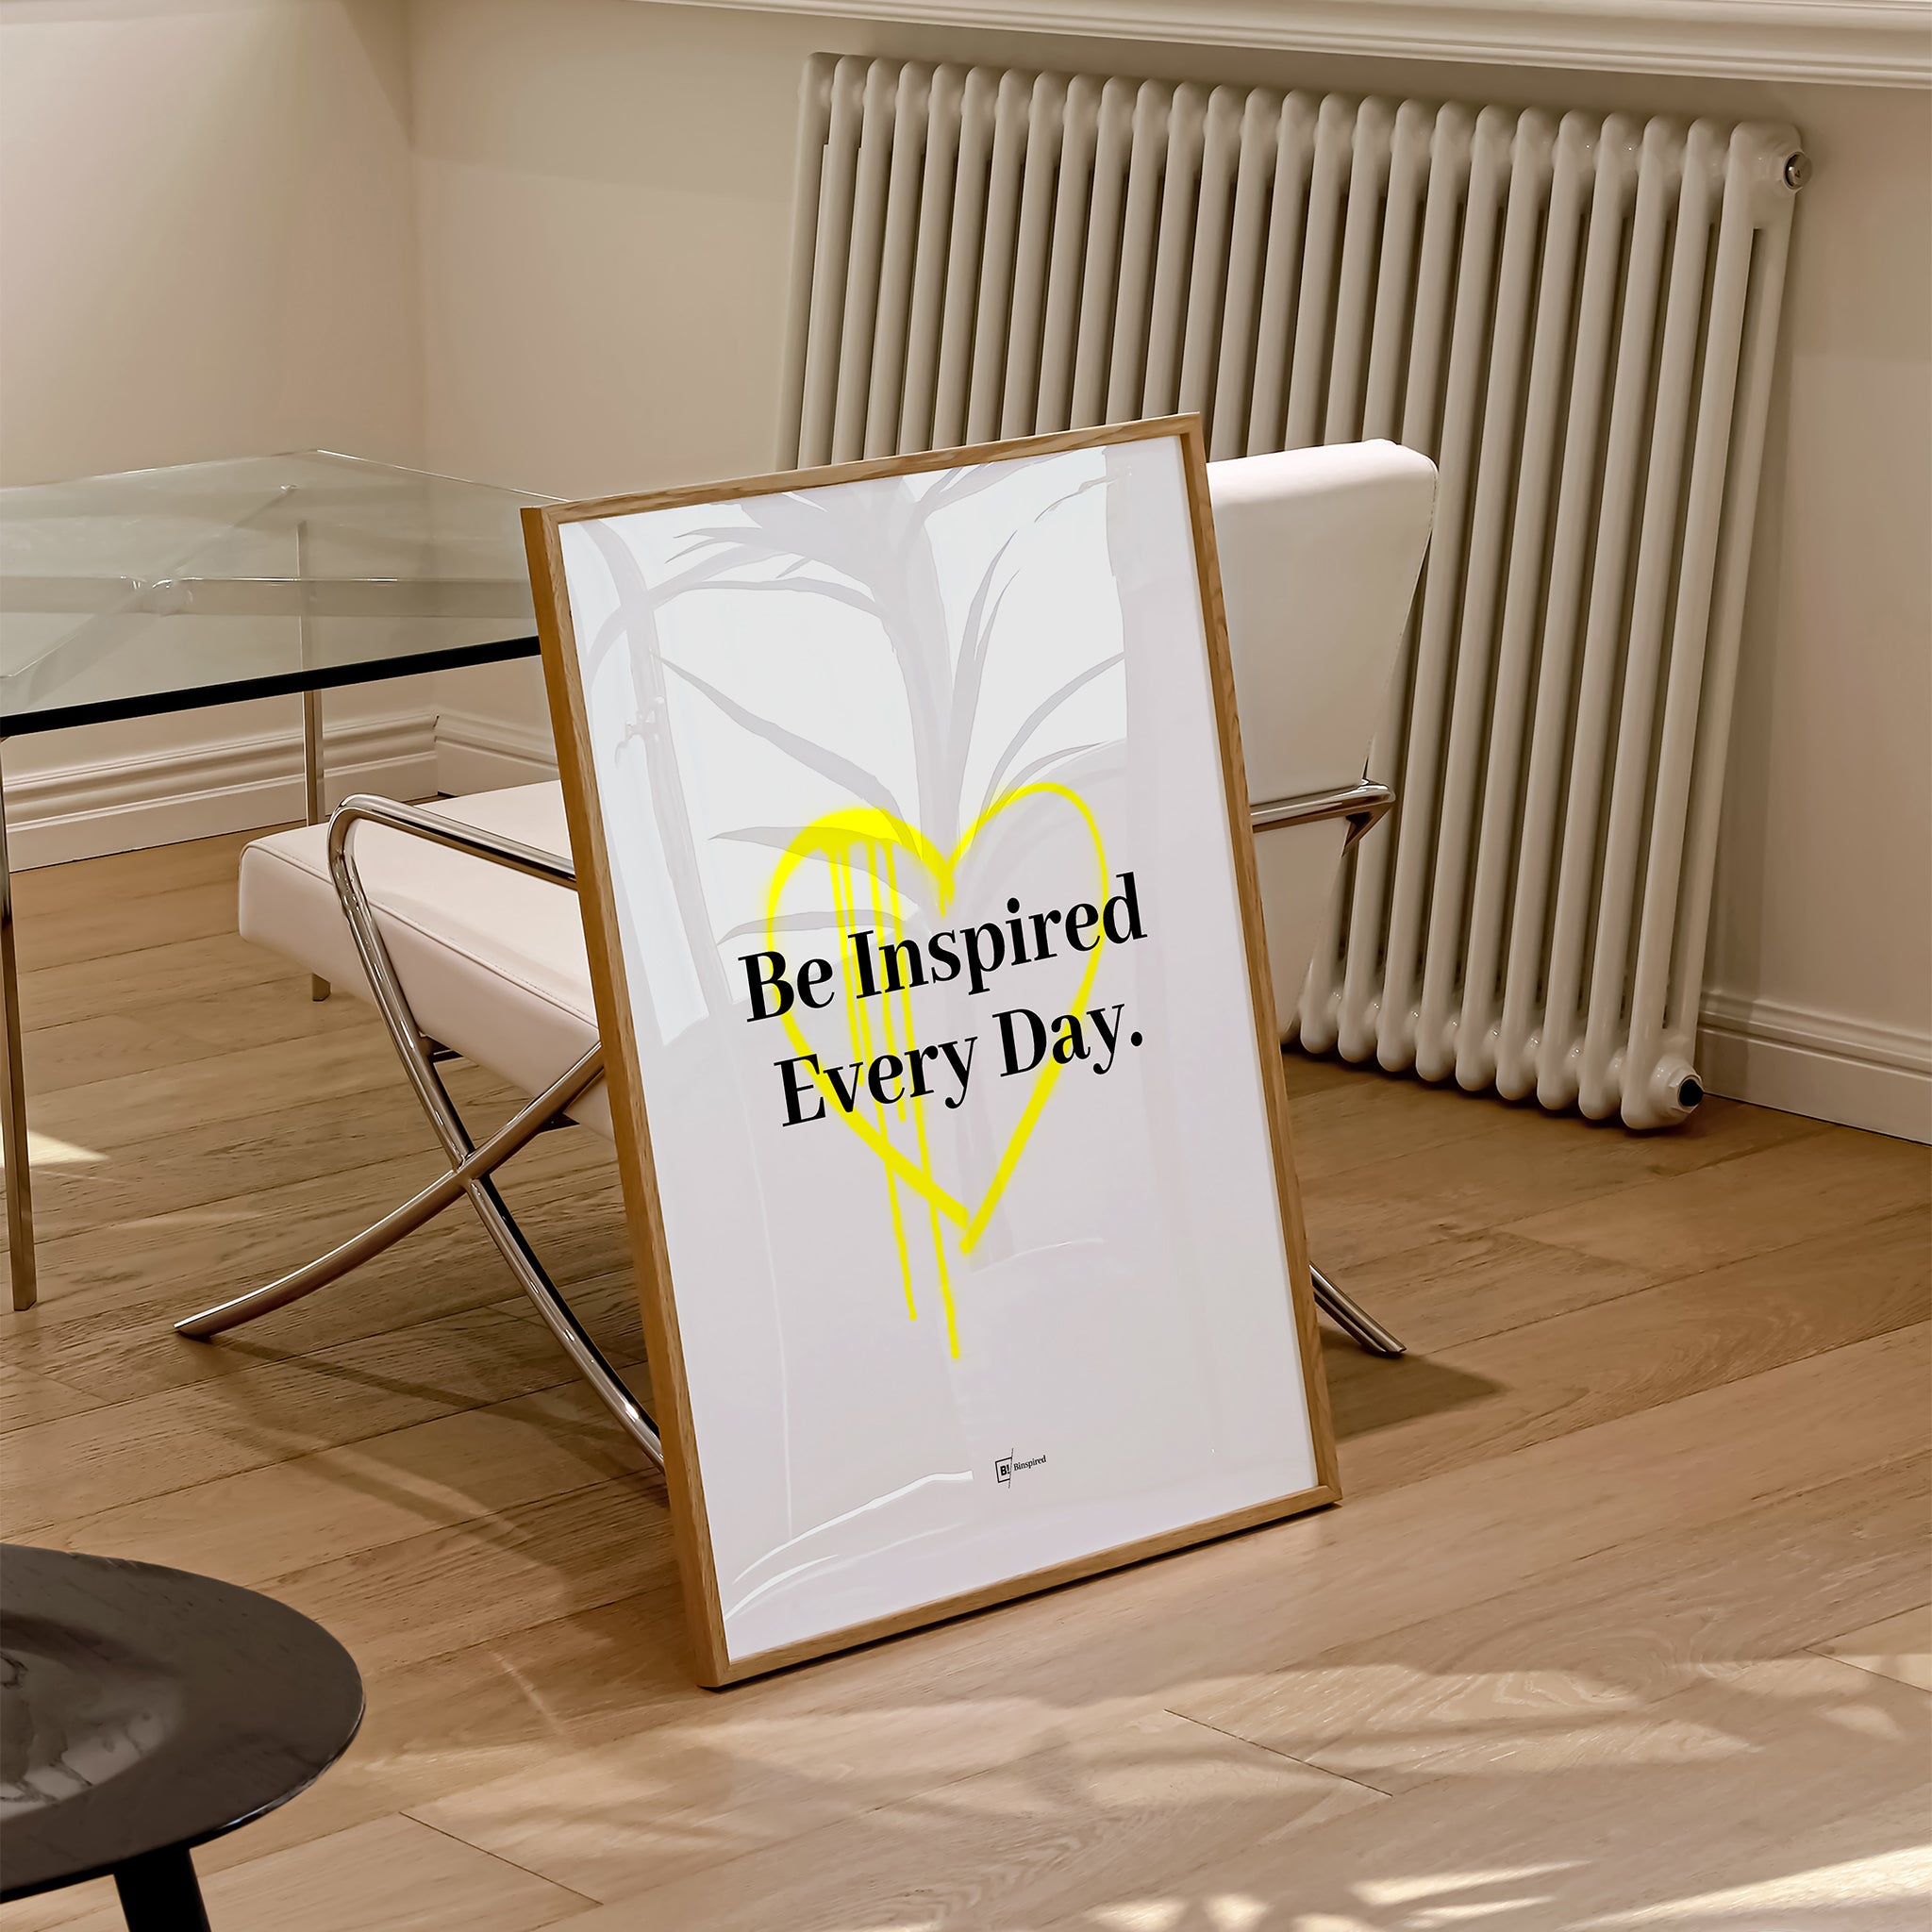 Be inspired by our "Be Inspired Every Day" quote art print! This artwork was printed using the giclée process on archival acid-free paper and is presented in a natural oak frame that captures its timeless beauty in every detail.